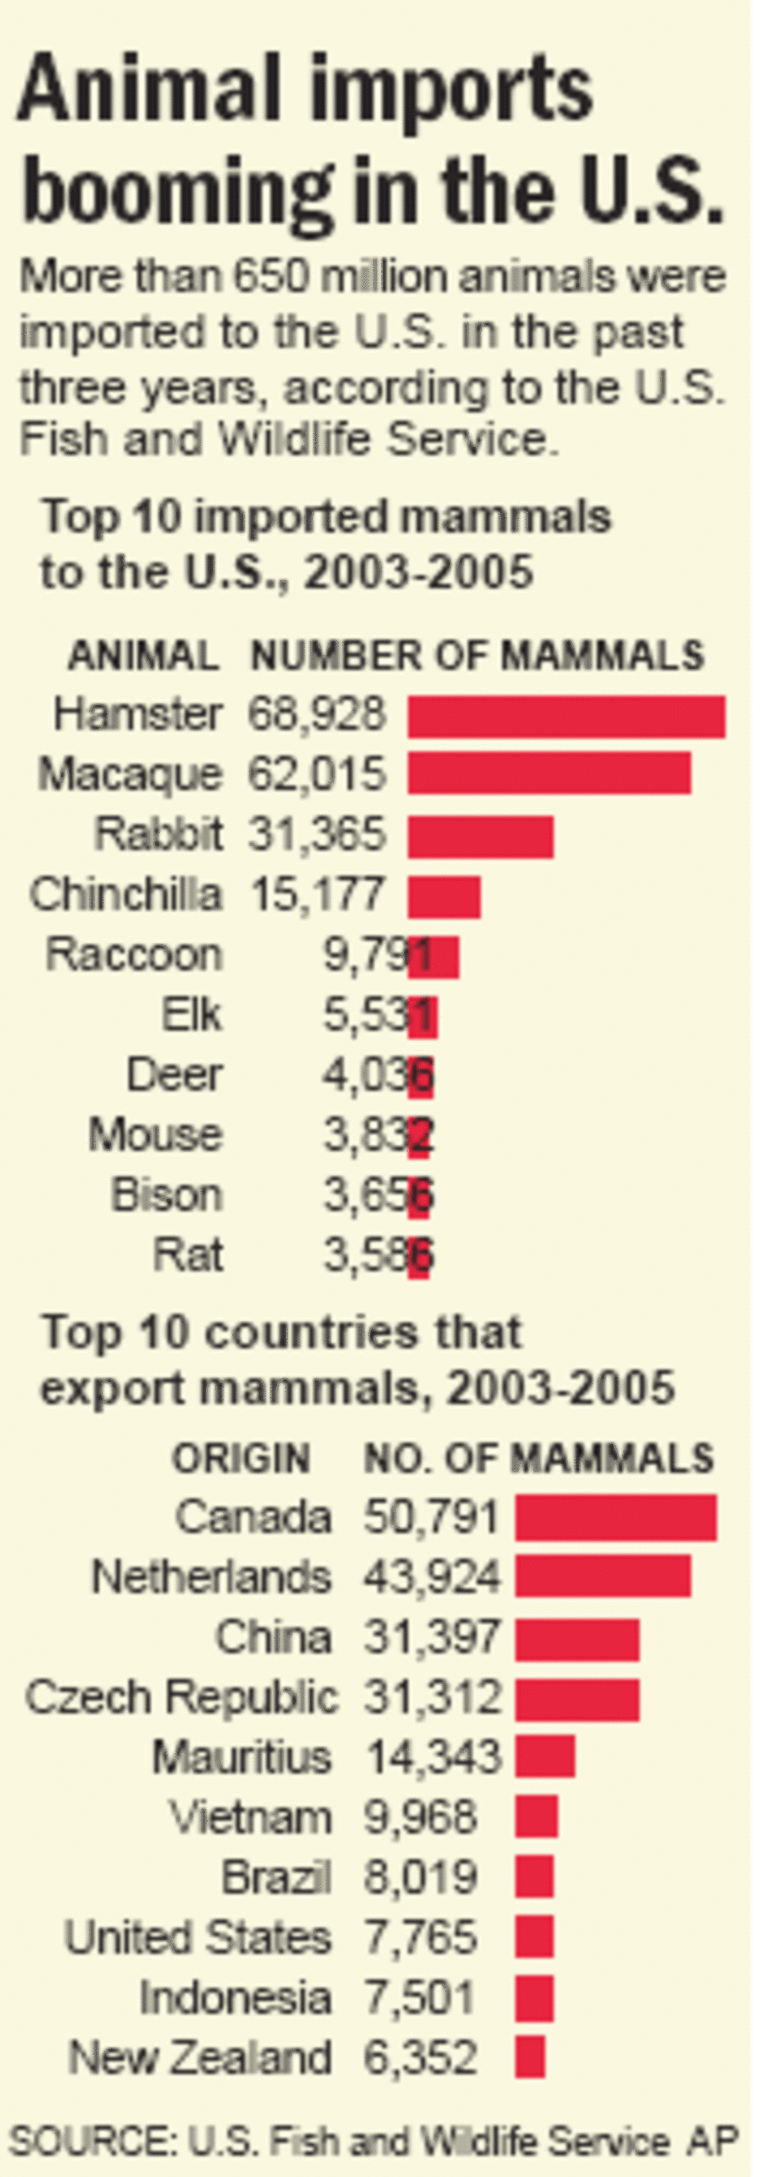 Animal imports booming in the U.S.